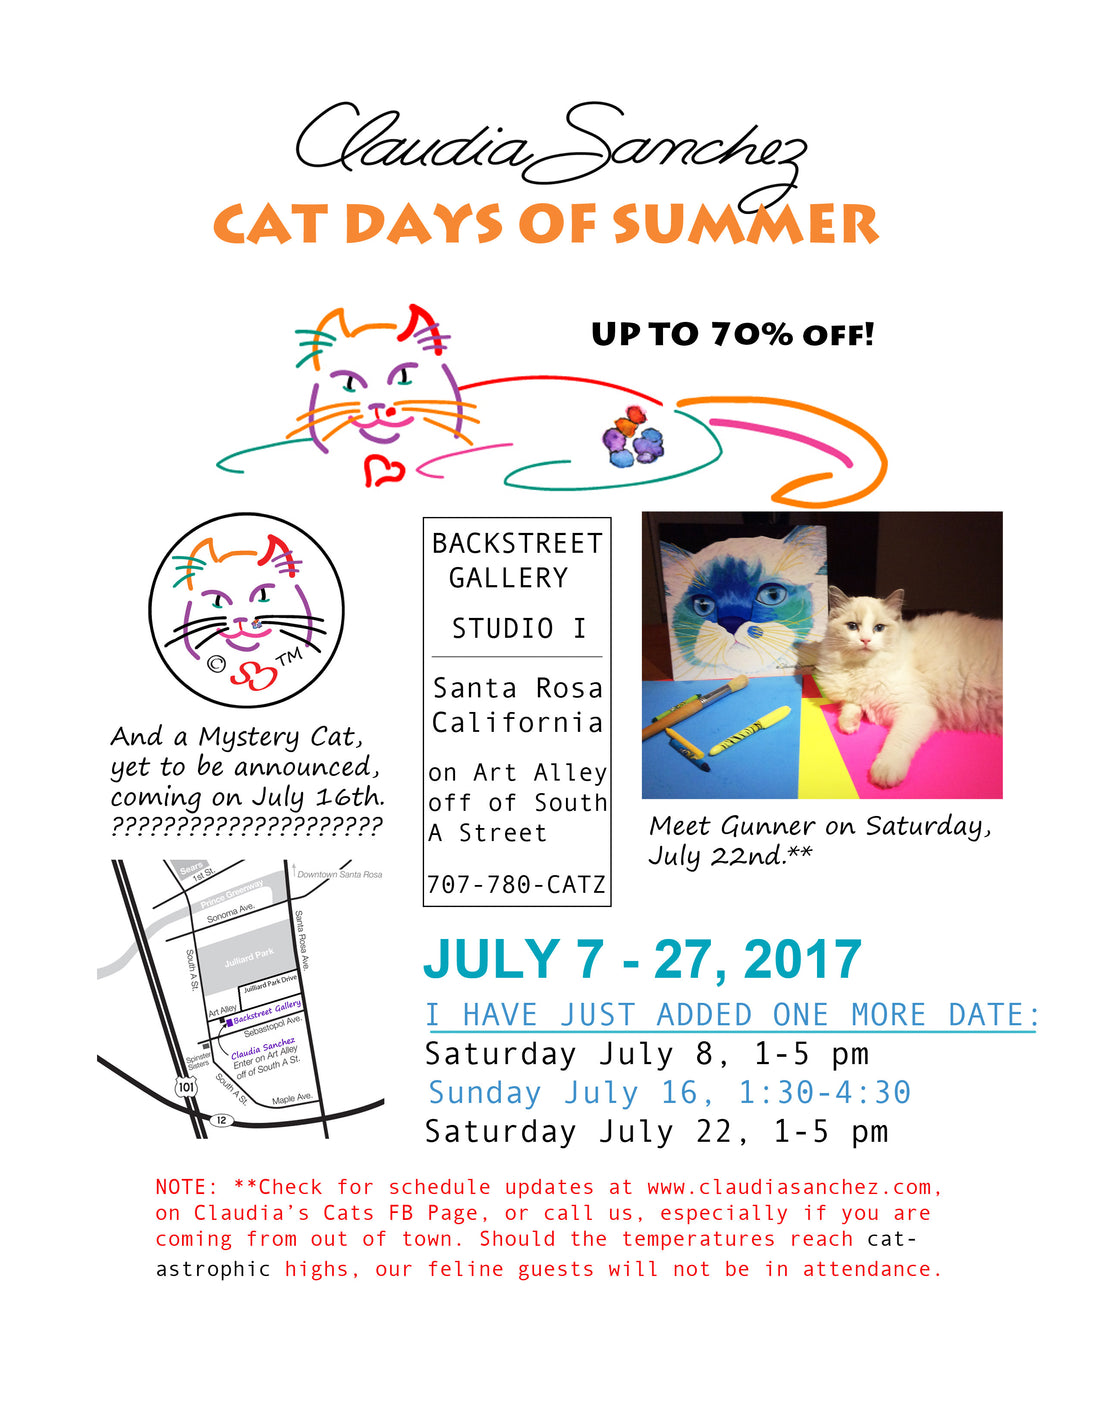 CAT DAYS OF SUMMER EVENT CONTINUES, NEW DATE ADDED!